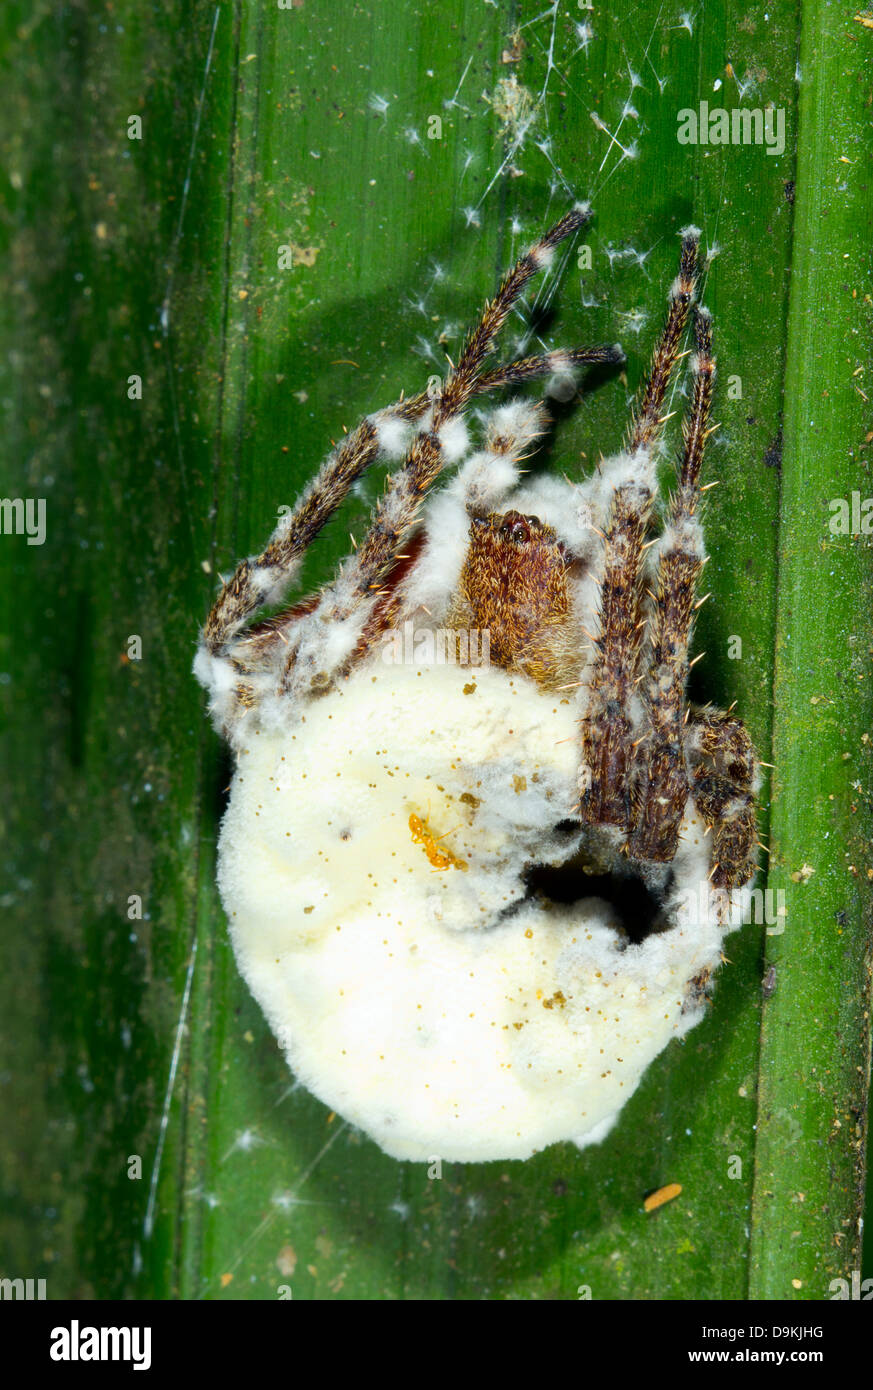 A large spider infected with fungus in the rainforest understory, Ecuador Stock Photo